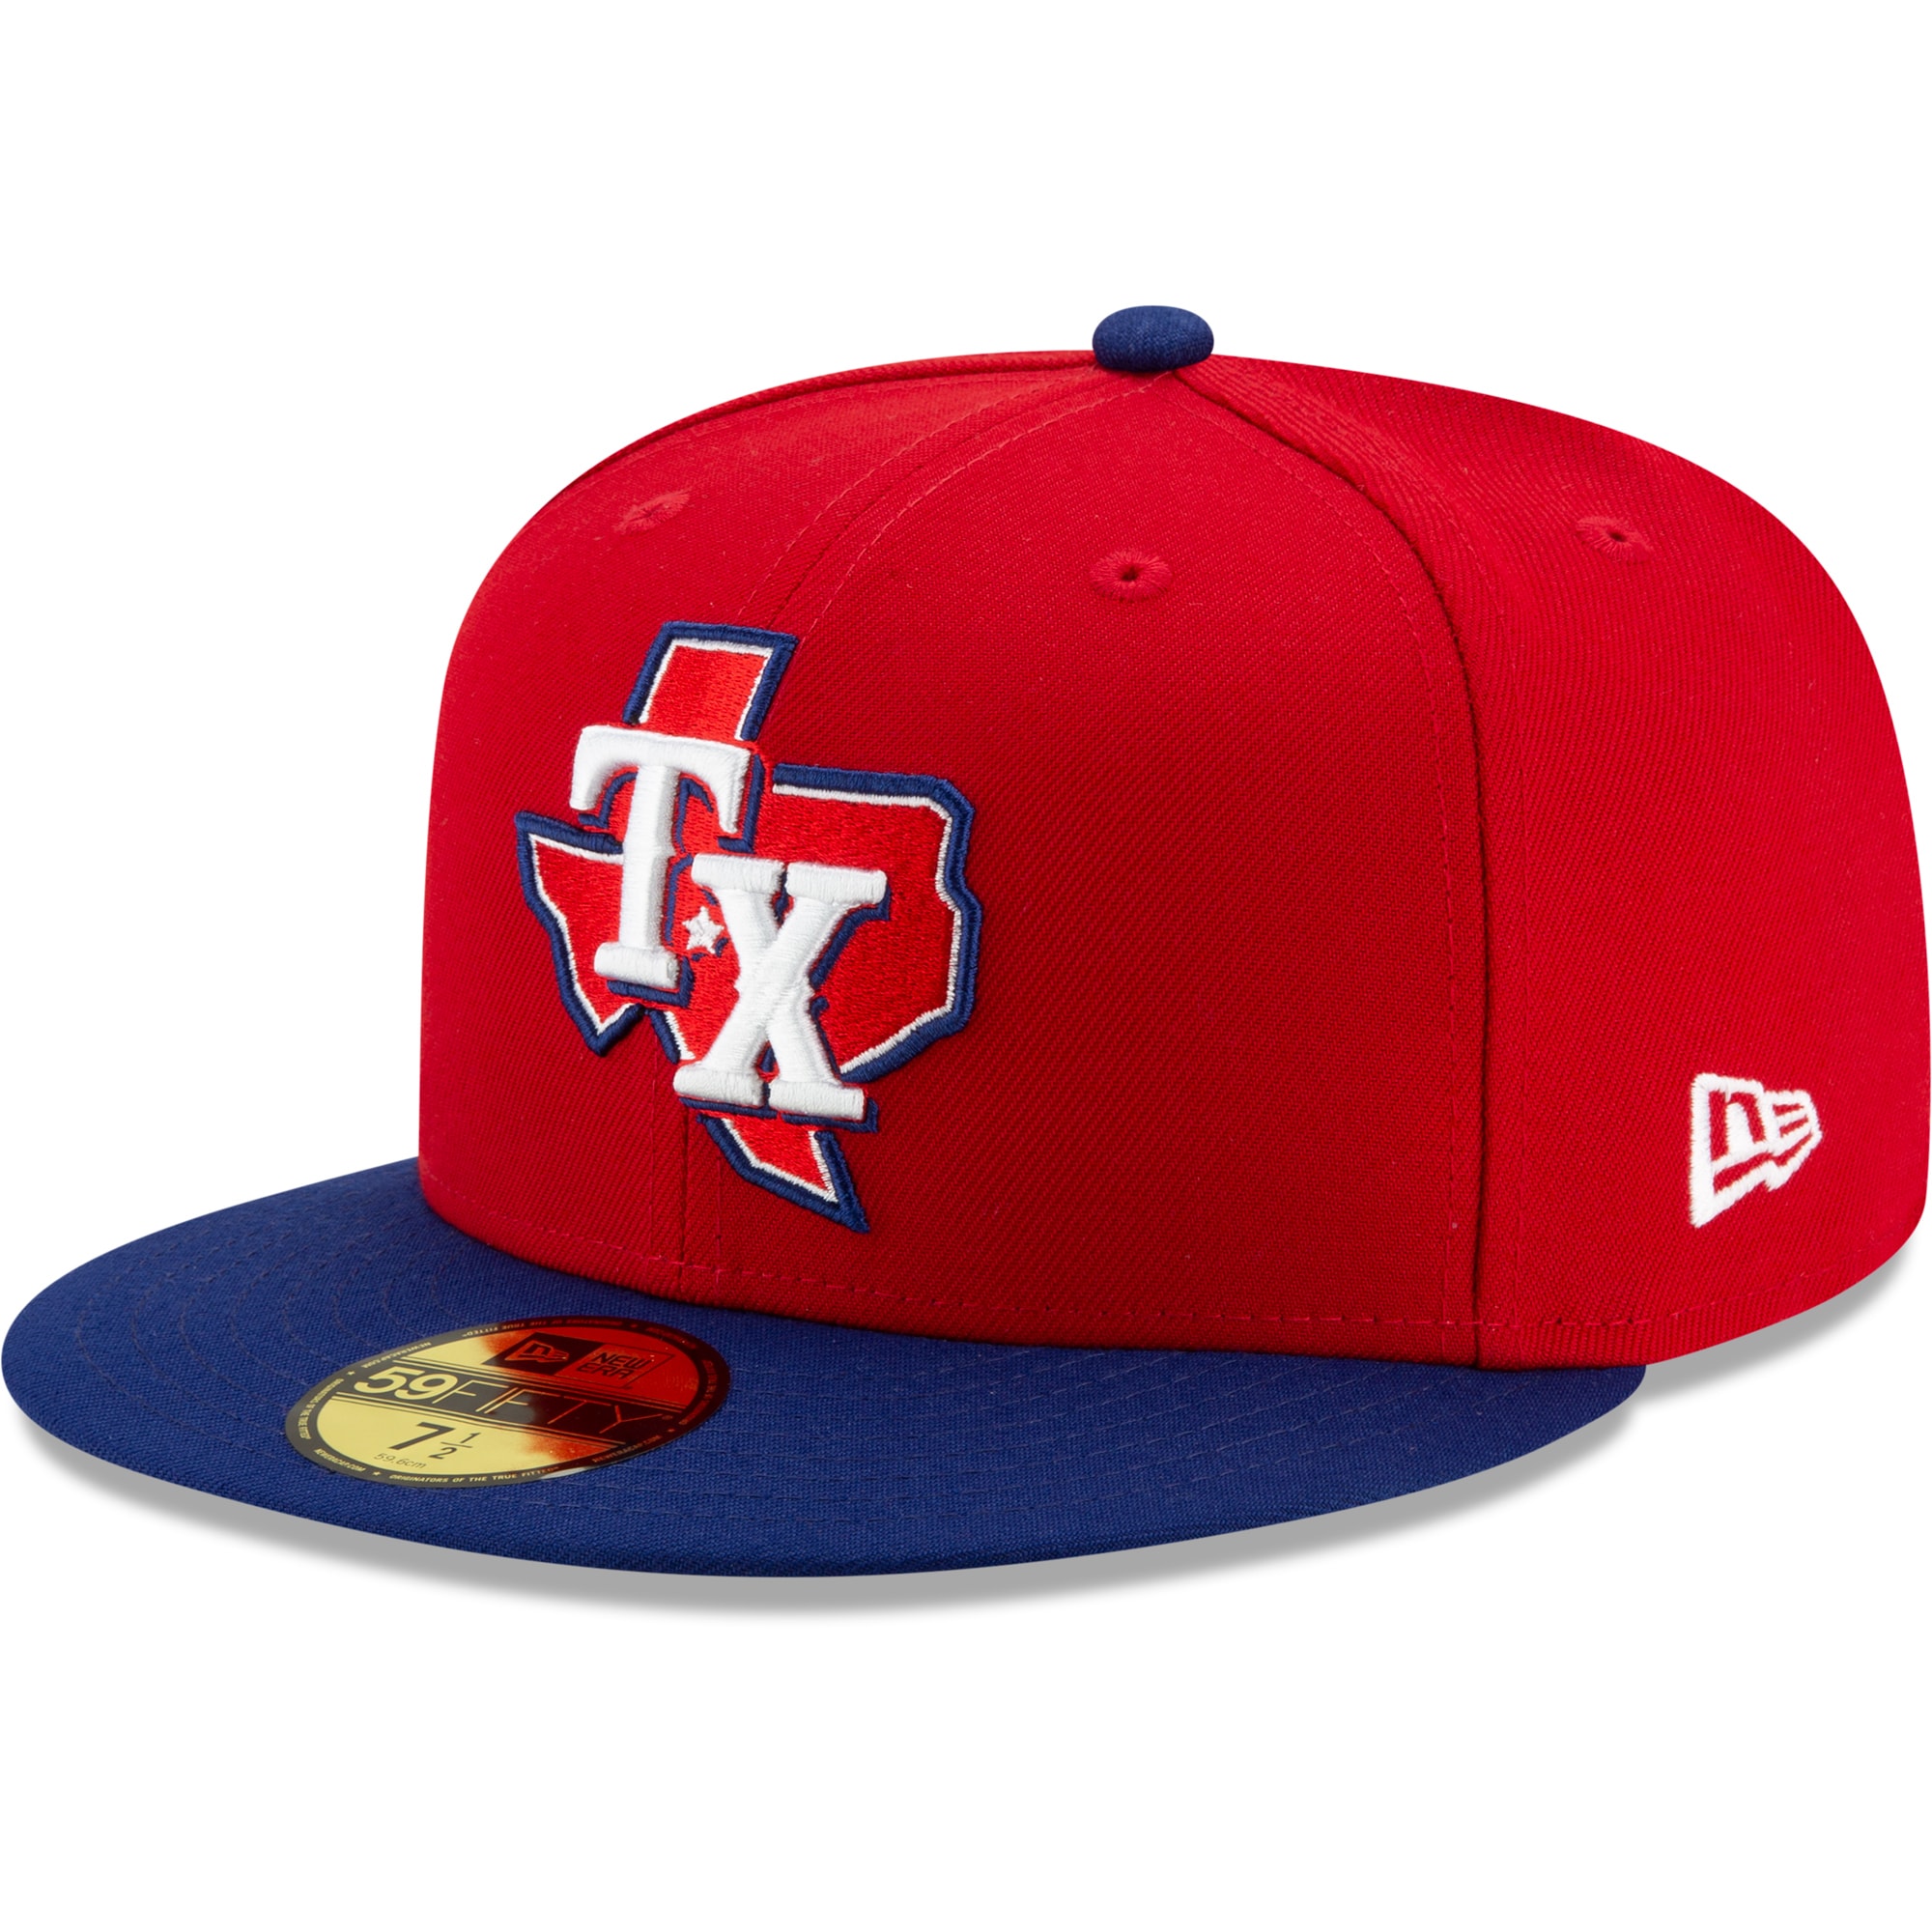 Men's New Era Red/Royal Texas Rangers 2020 Alternate 3 Authentic Collection On Field 59FIFTY Fitted Hat - image 1 of 4